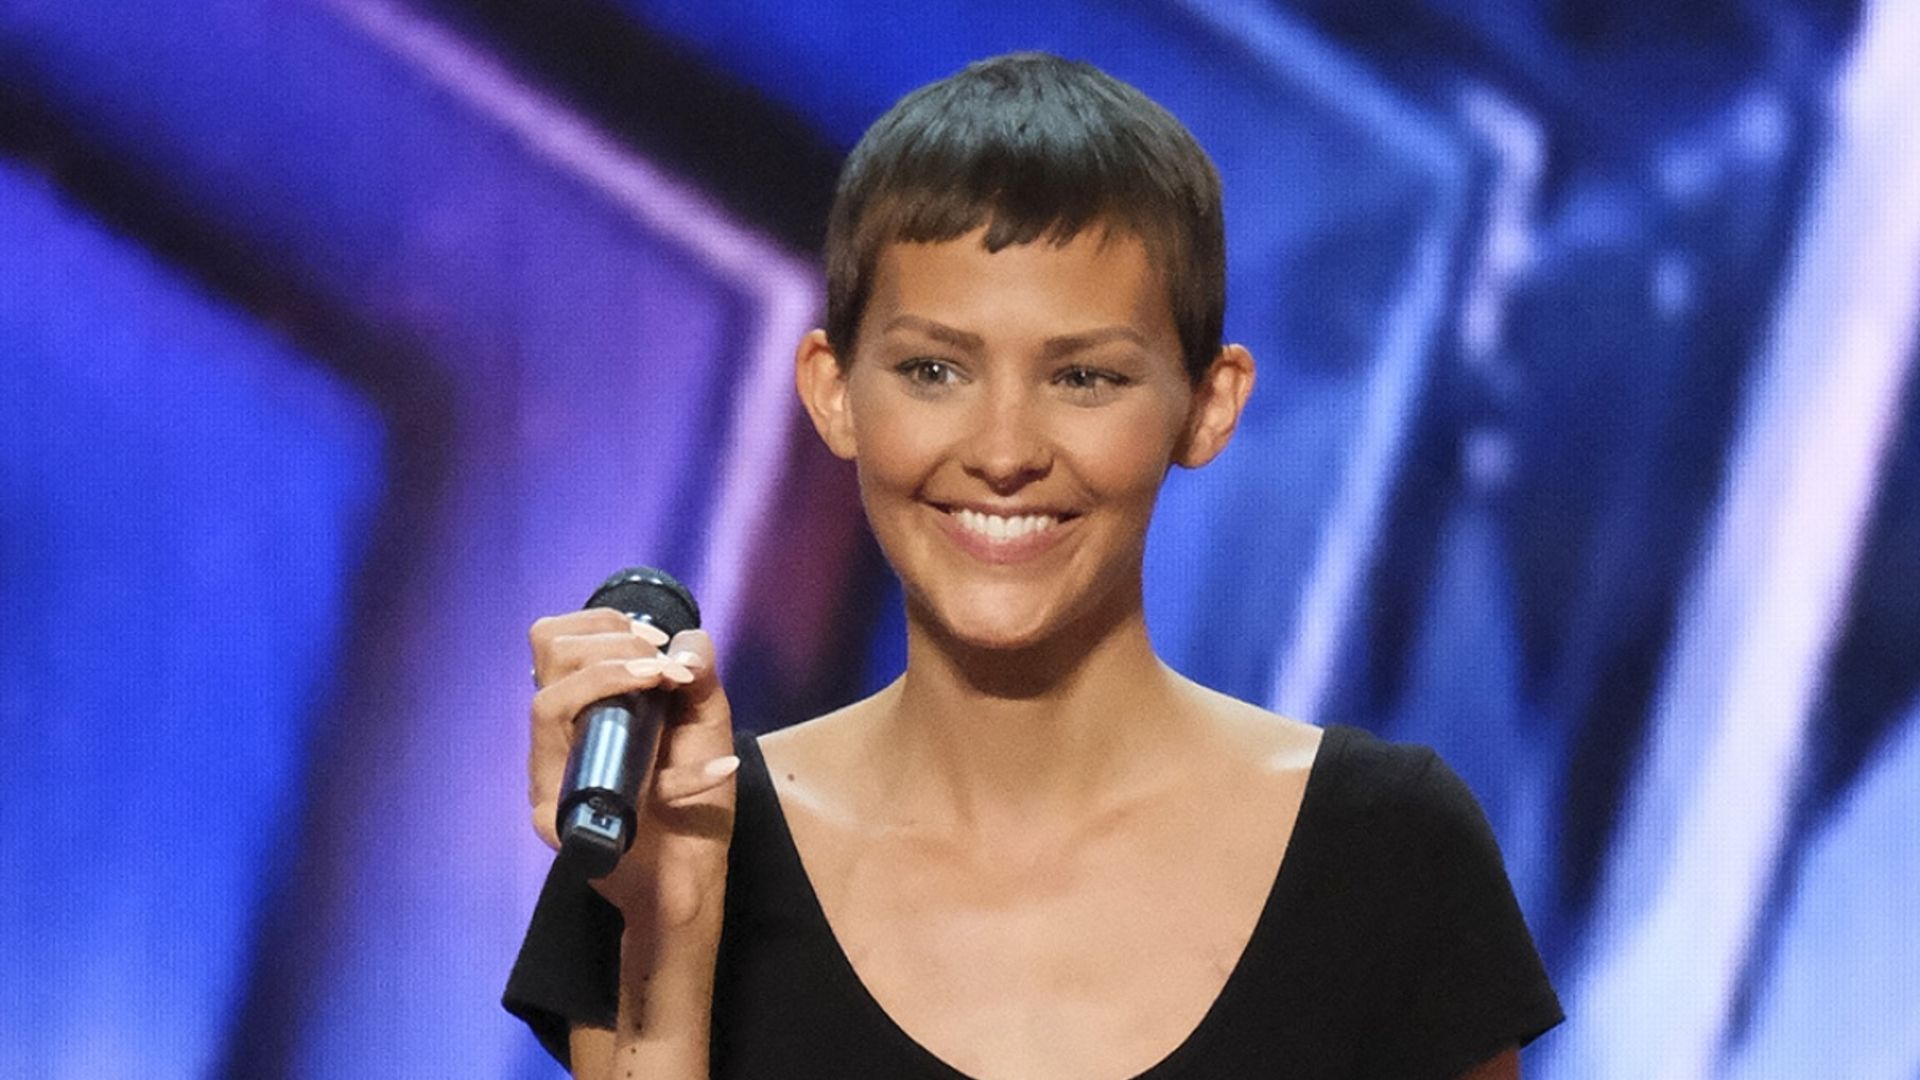 AGT's Nightbirde's family shares heartbreaking statement with bedside video